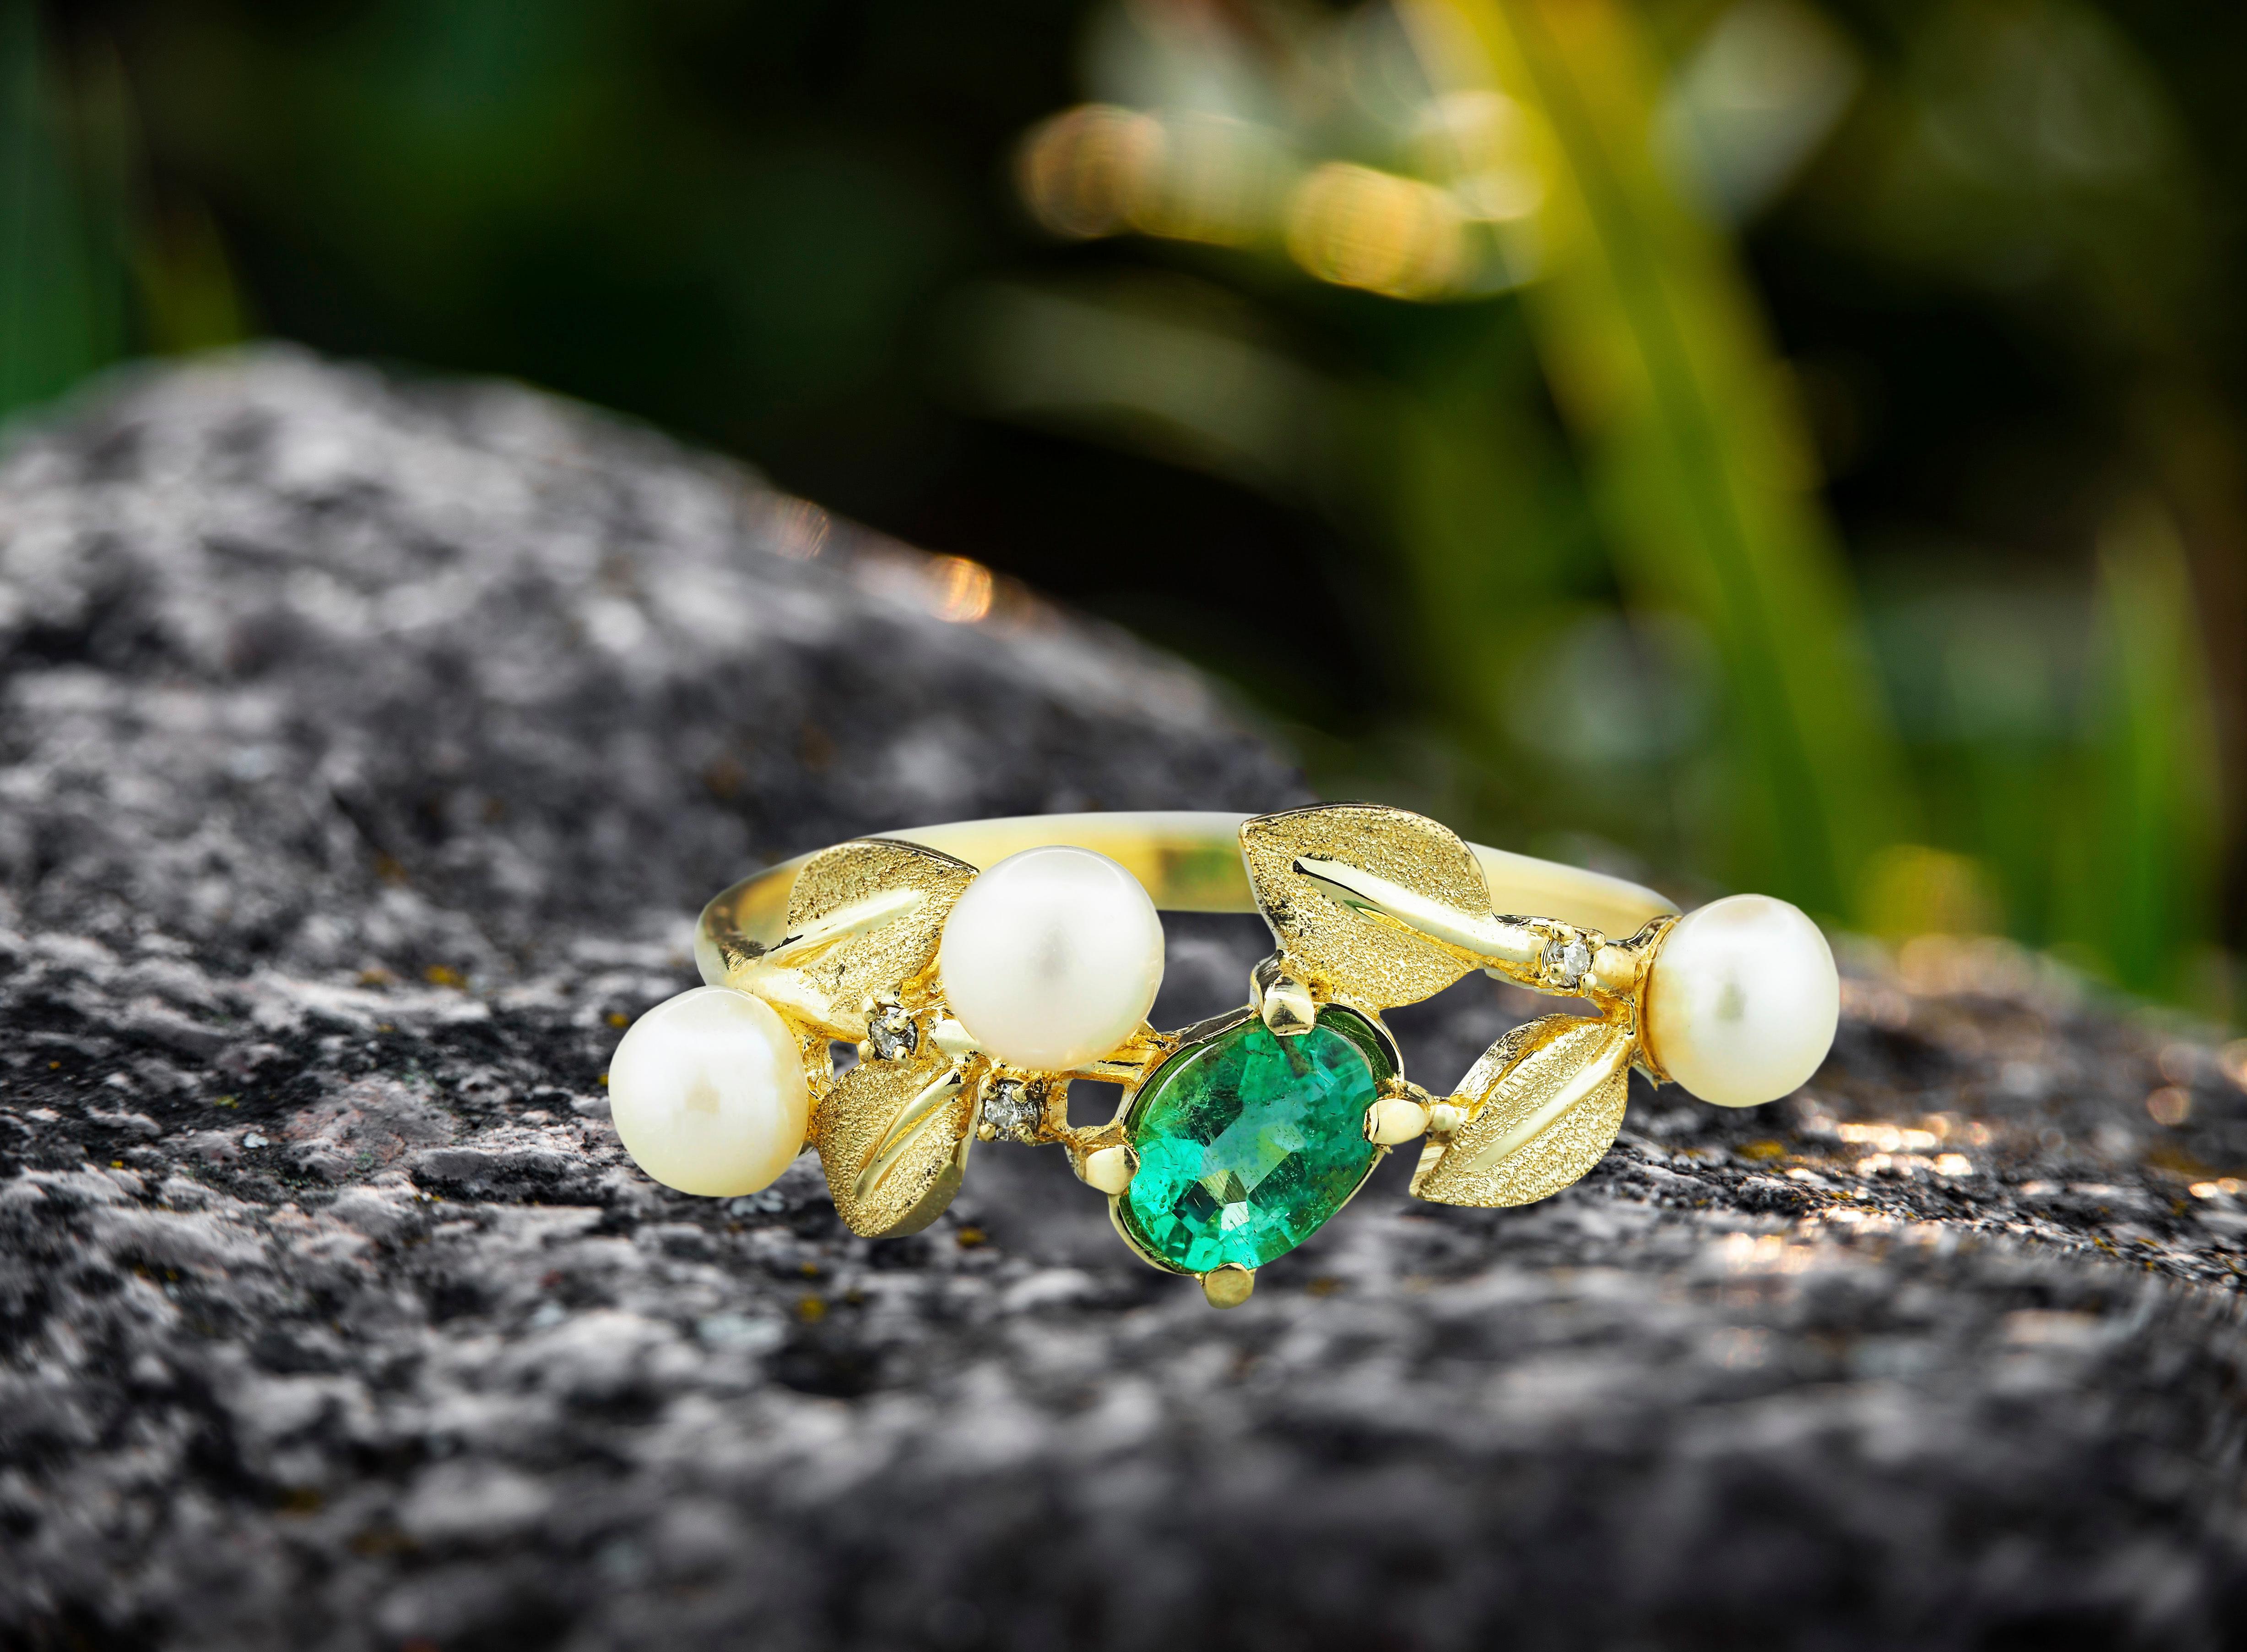 For Sale:  14k Gold Ring with Emerald, Pearls and Diamonds 10